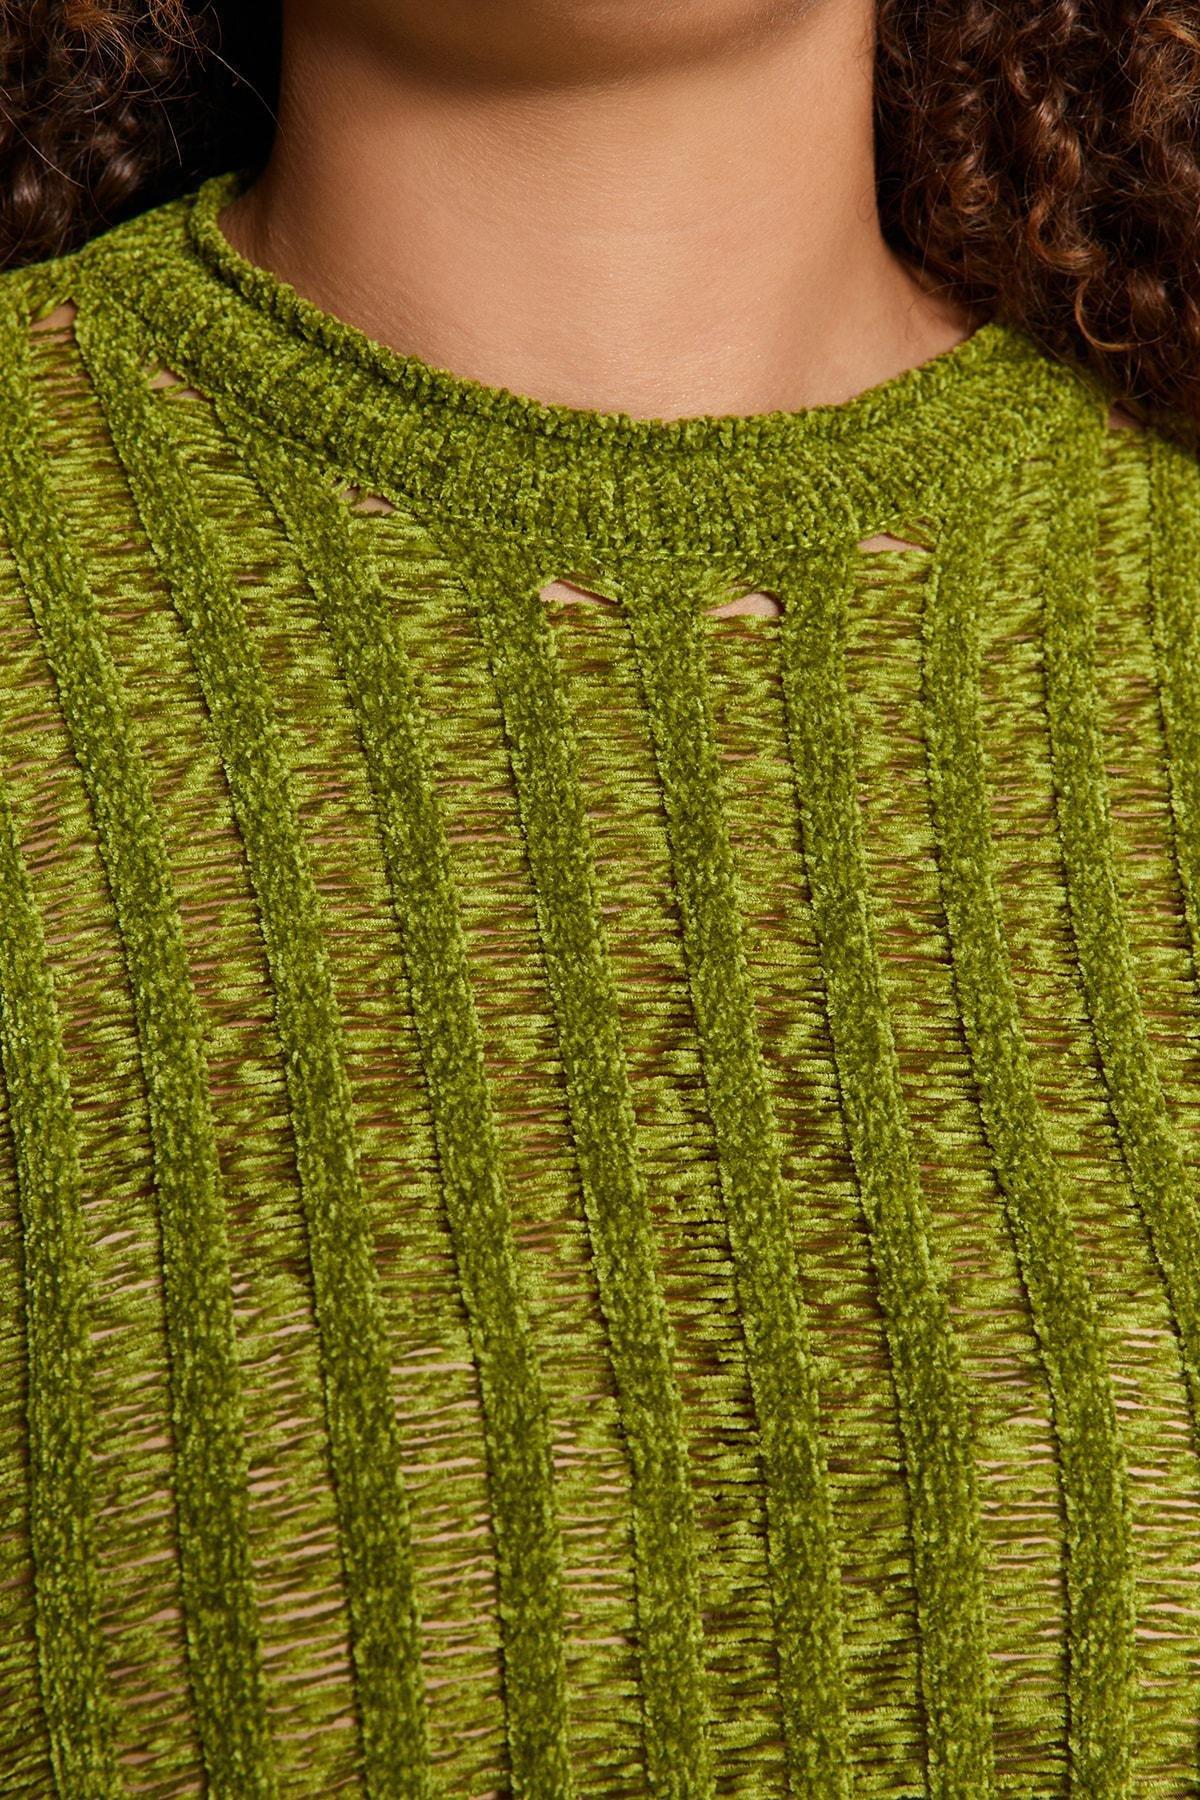 Trendyol - Green Perforated Knitted Sweater